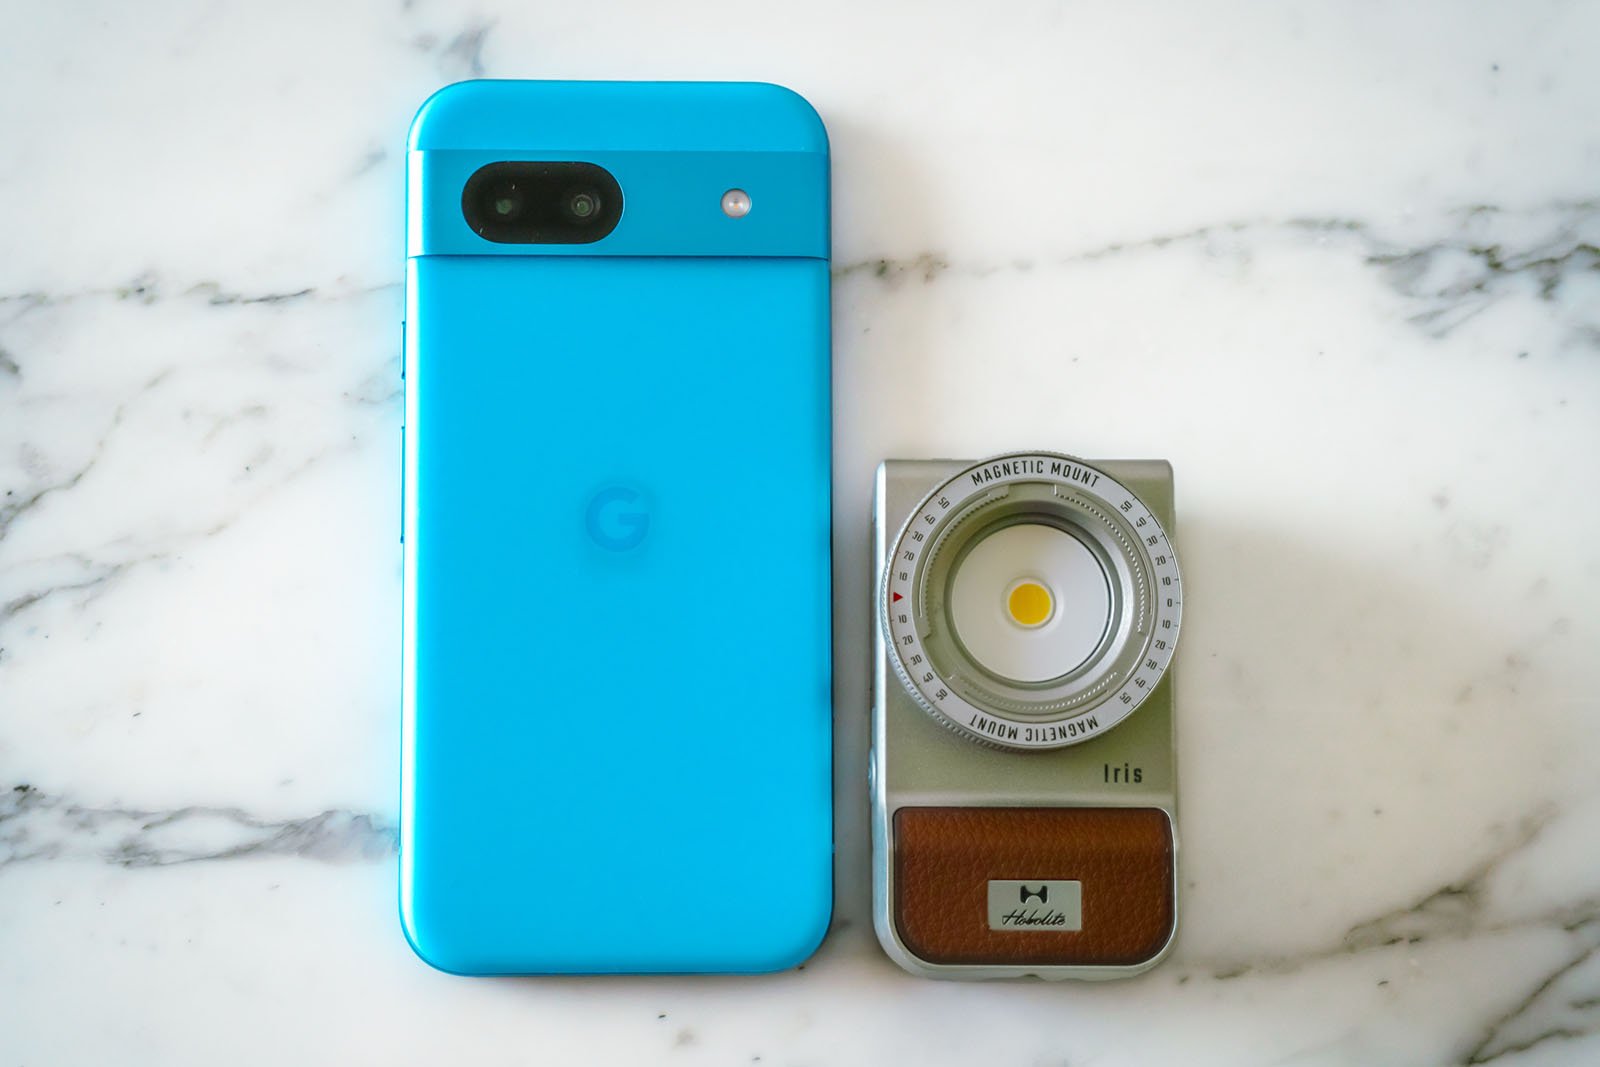 A cobalt blue smartphone with a "G" logo on the back lies on a white marble surface. Next to it is a compact, retro-styled camera with a magnetic mount and "Holstic" branding on a leather-textured grip.